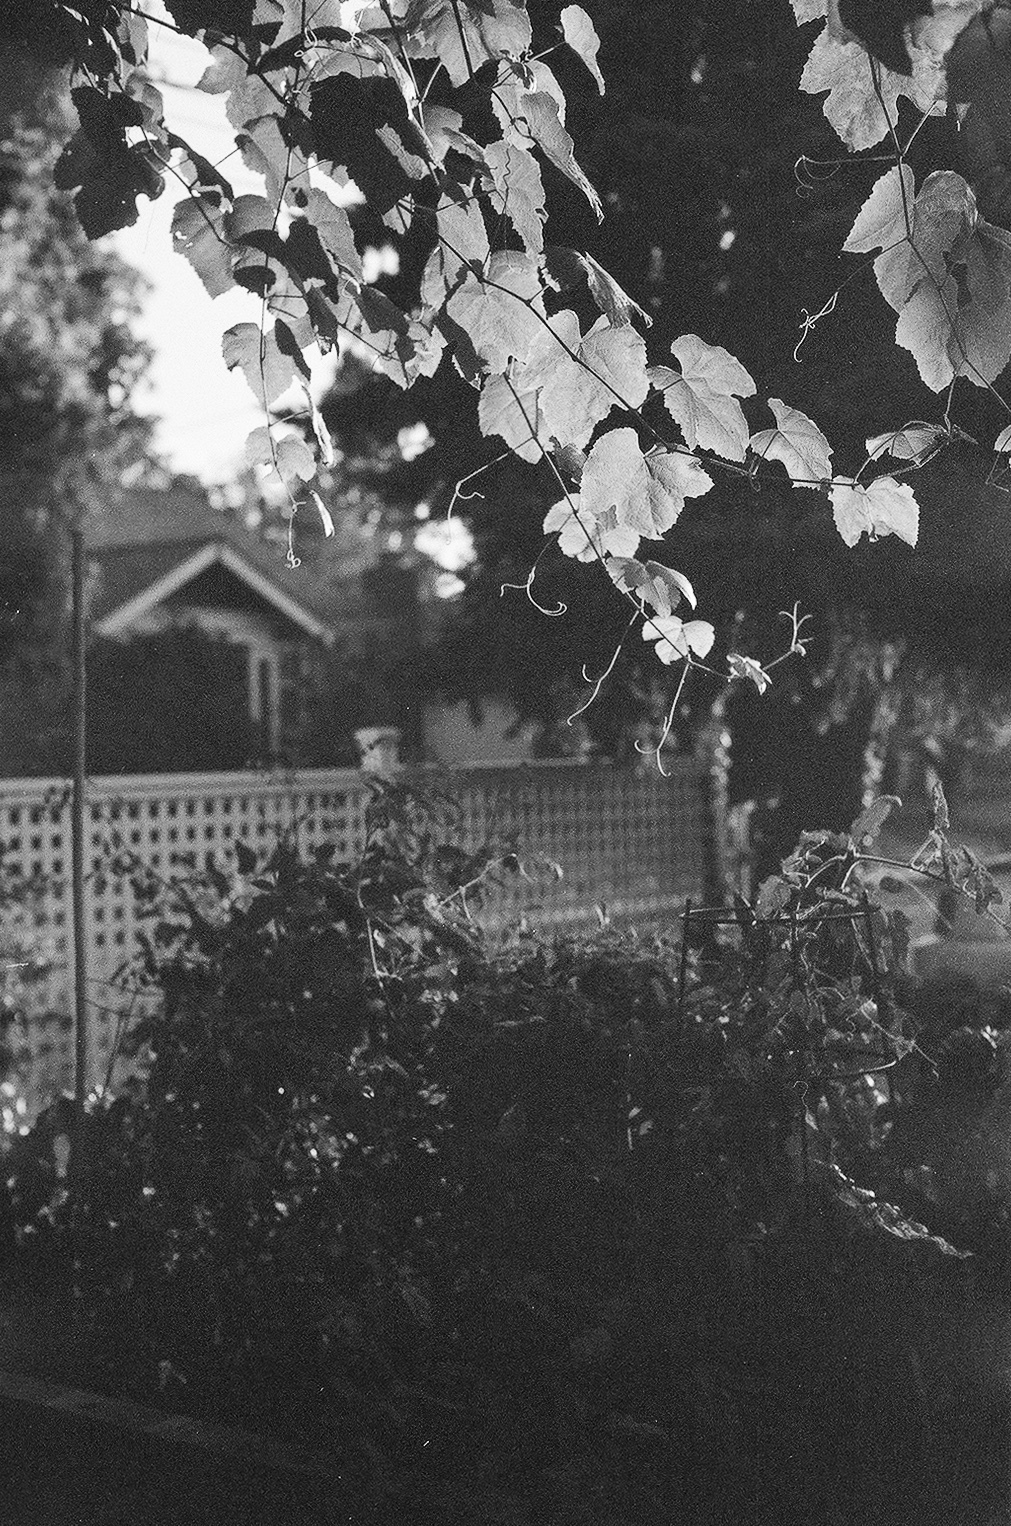 Black and white photo of grapevine leaves hanging down in front of a white lattice fence and a garden bed.